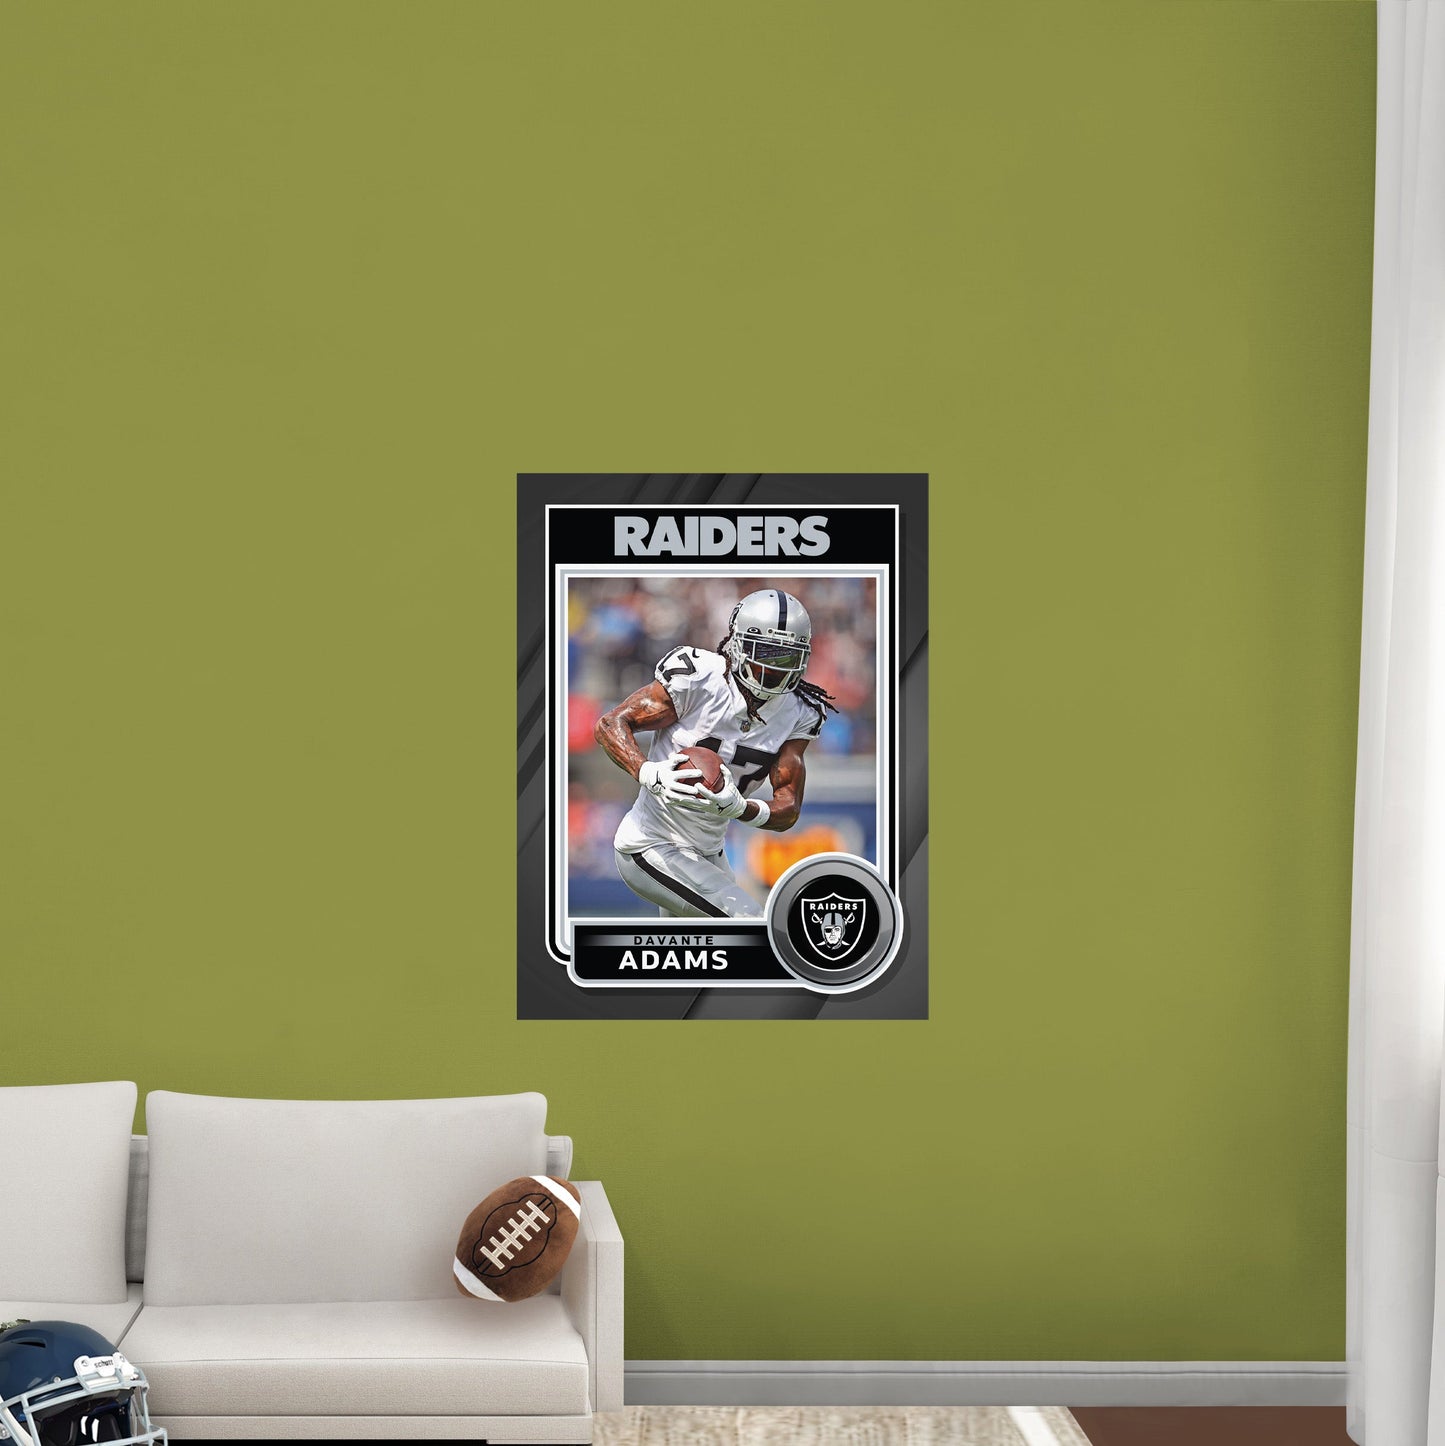 Las Vegas Raiders: Davante Adams Poster - Officially Licensed NFL Removable Adhesive Decal